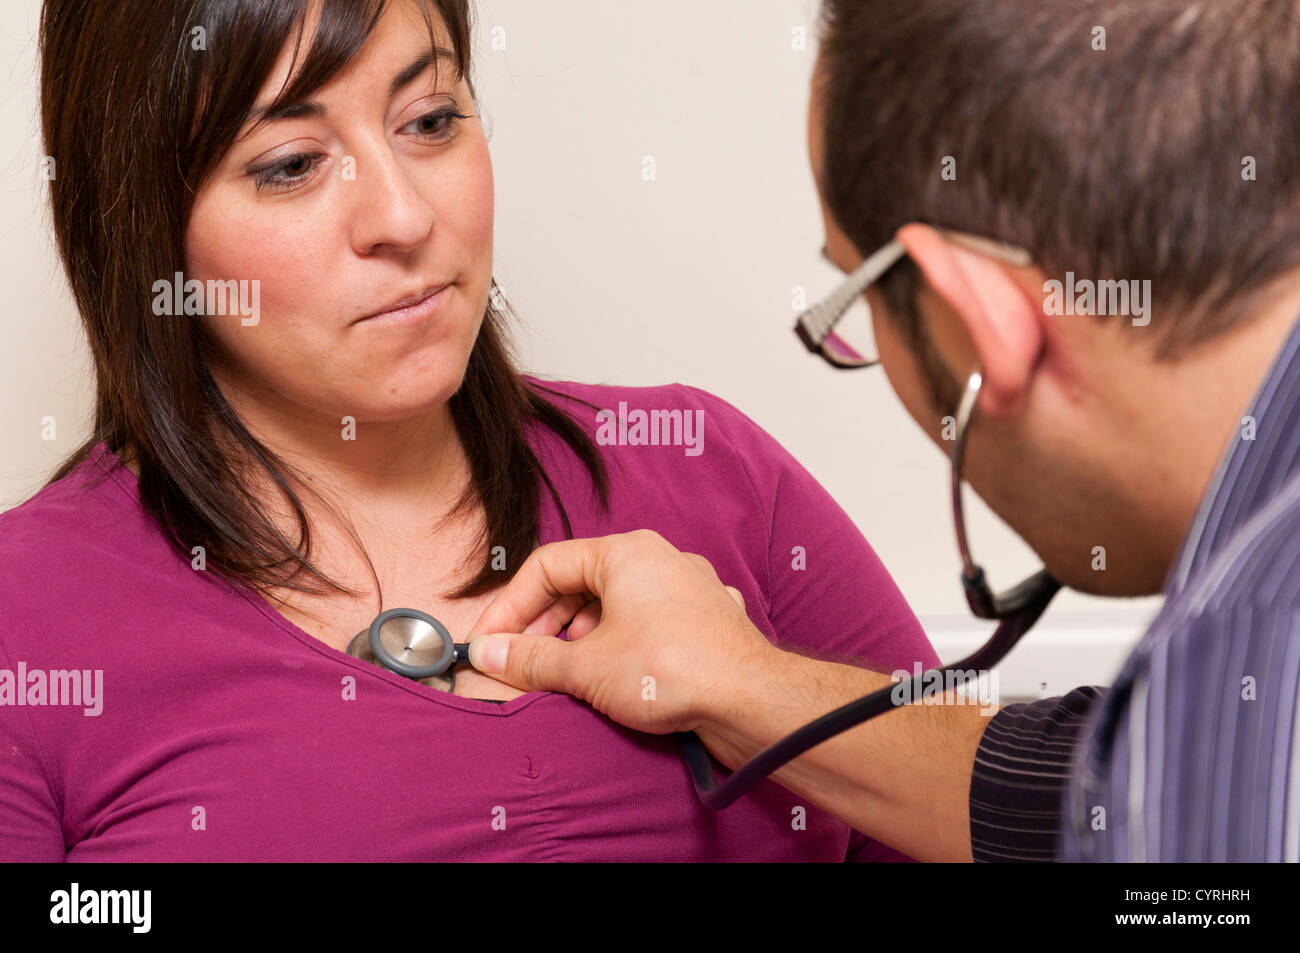 GP Doctor surgery patient consultation UK. Doctor listening to patient heart using stethoscope. Stock Photo